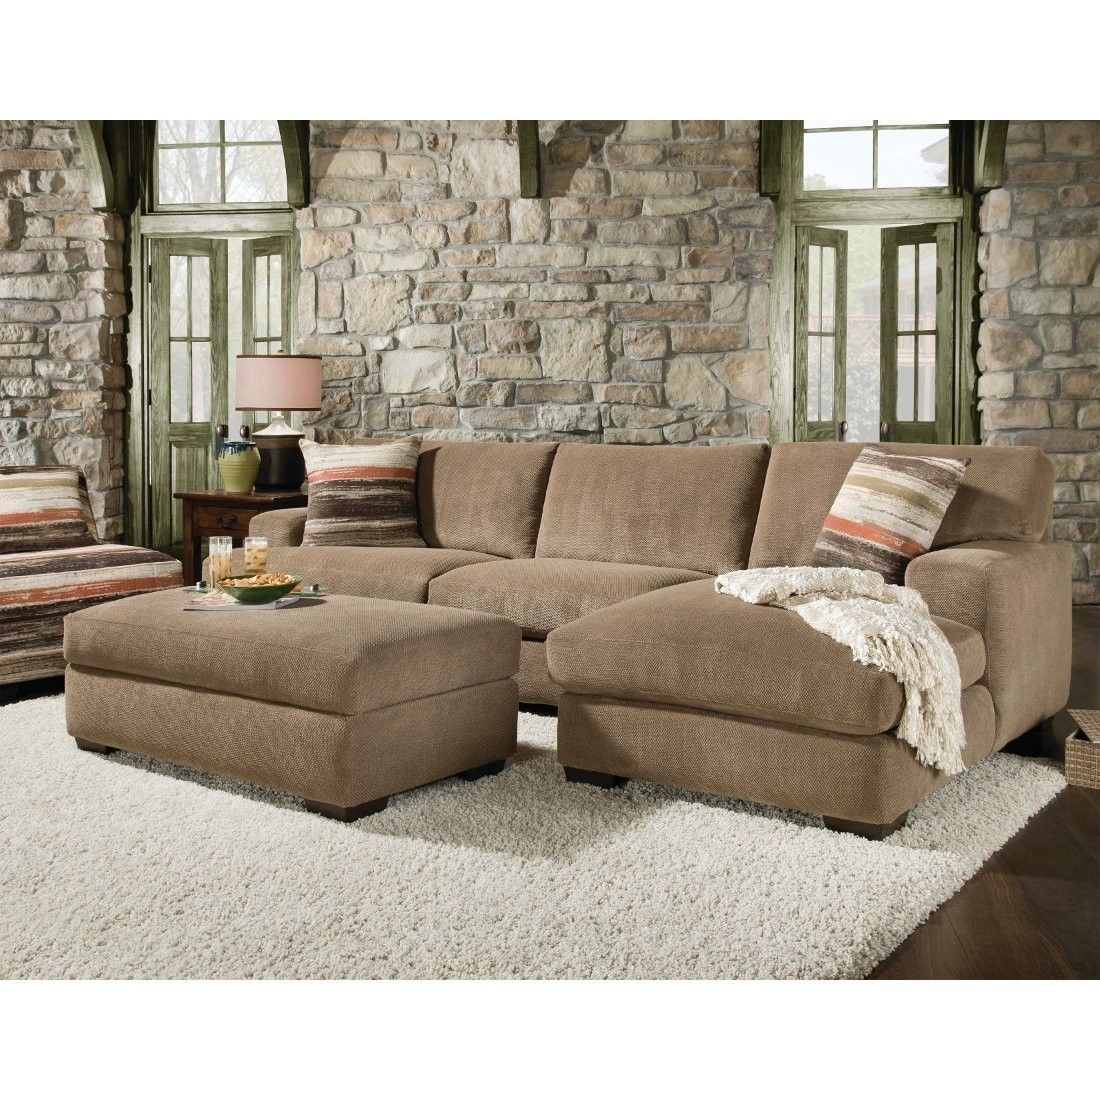 Beautiful Sectional Sofa With Chaise And Ottoman Pictures With Regard To Long Sectional Sofas With Chaise (Photo 10 of 10)